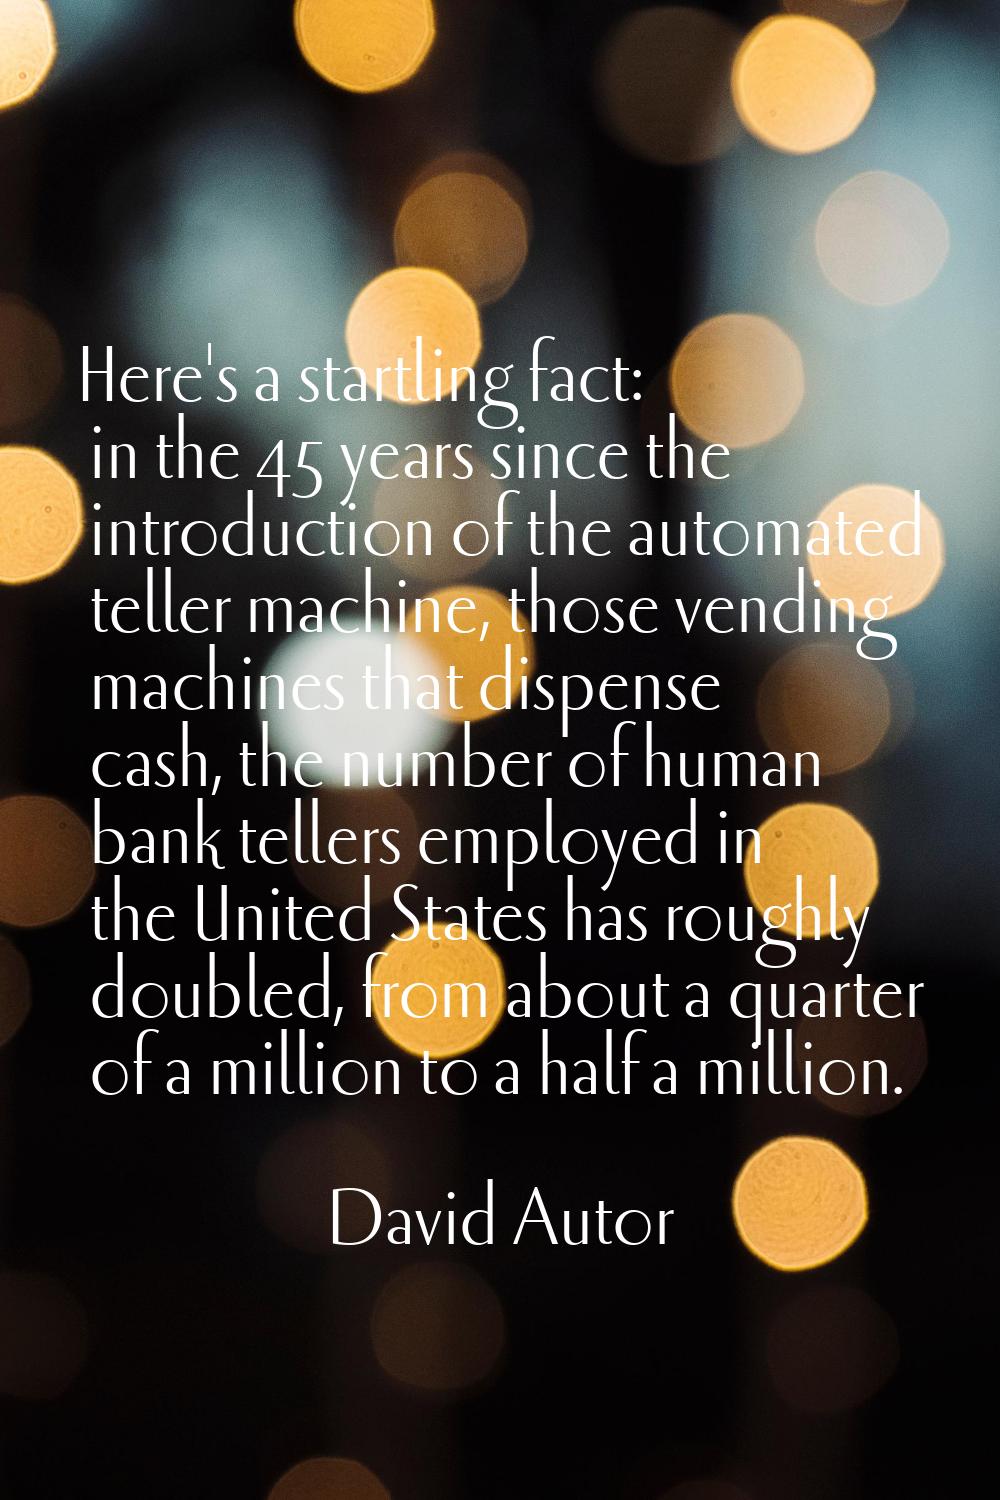 Here's a startling fact: in the 45 years since the introduction of the automated teller machine, th